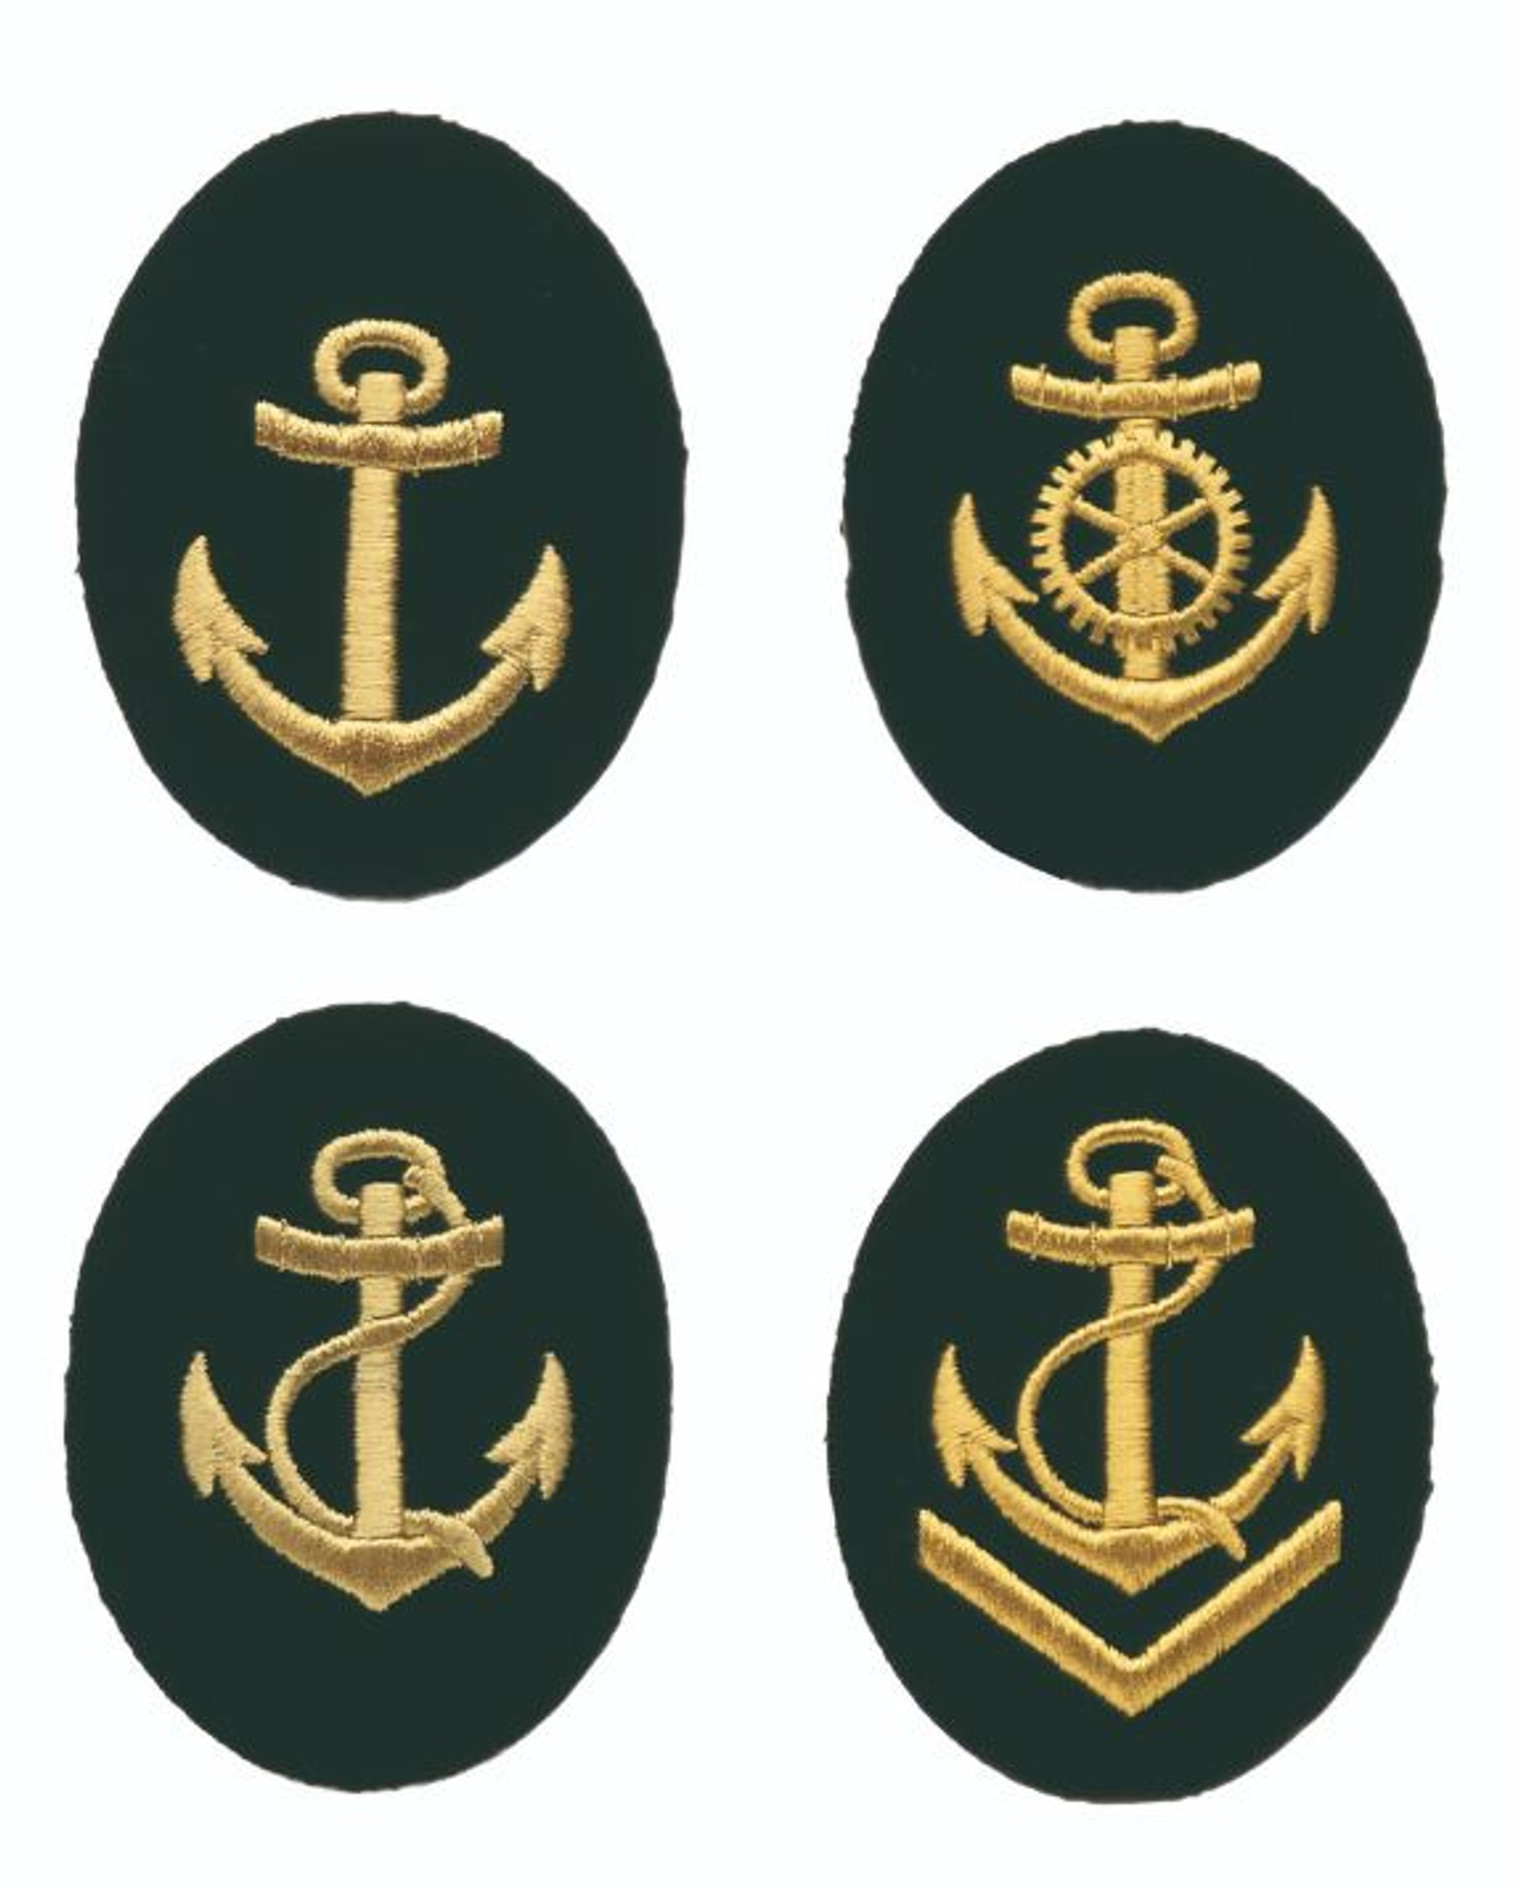 East German Navy Branch Patches